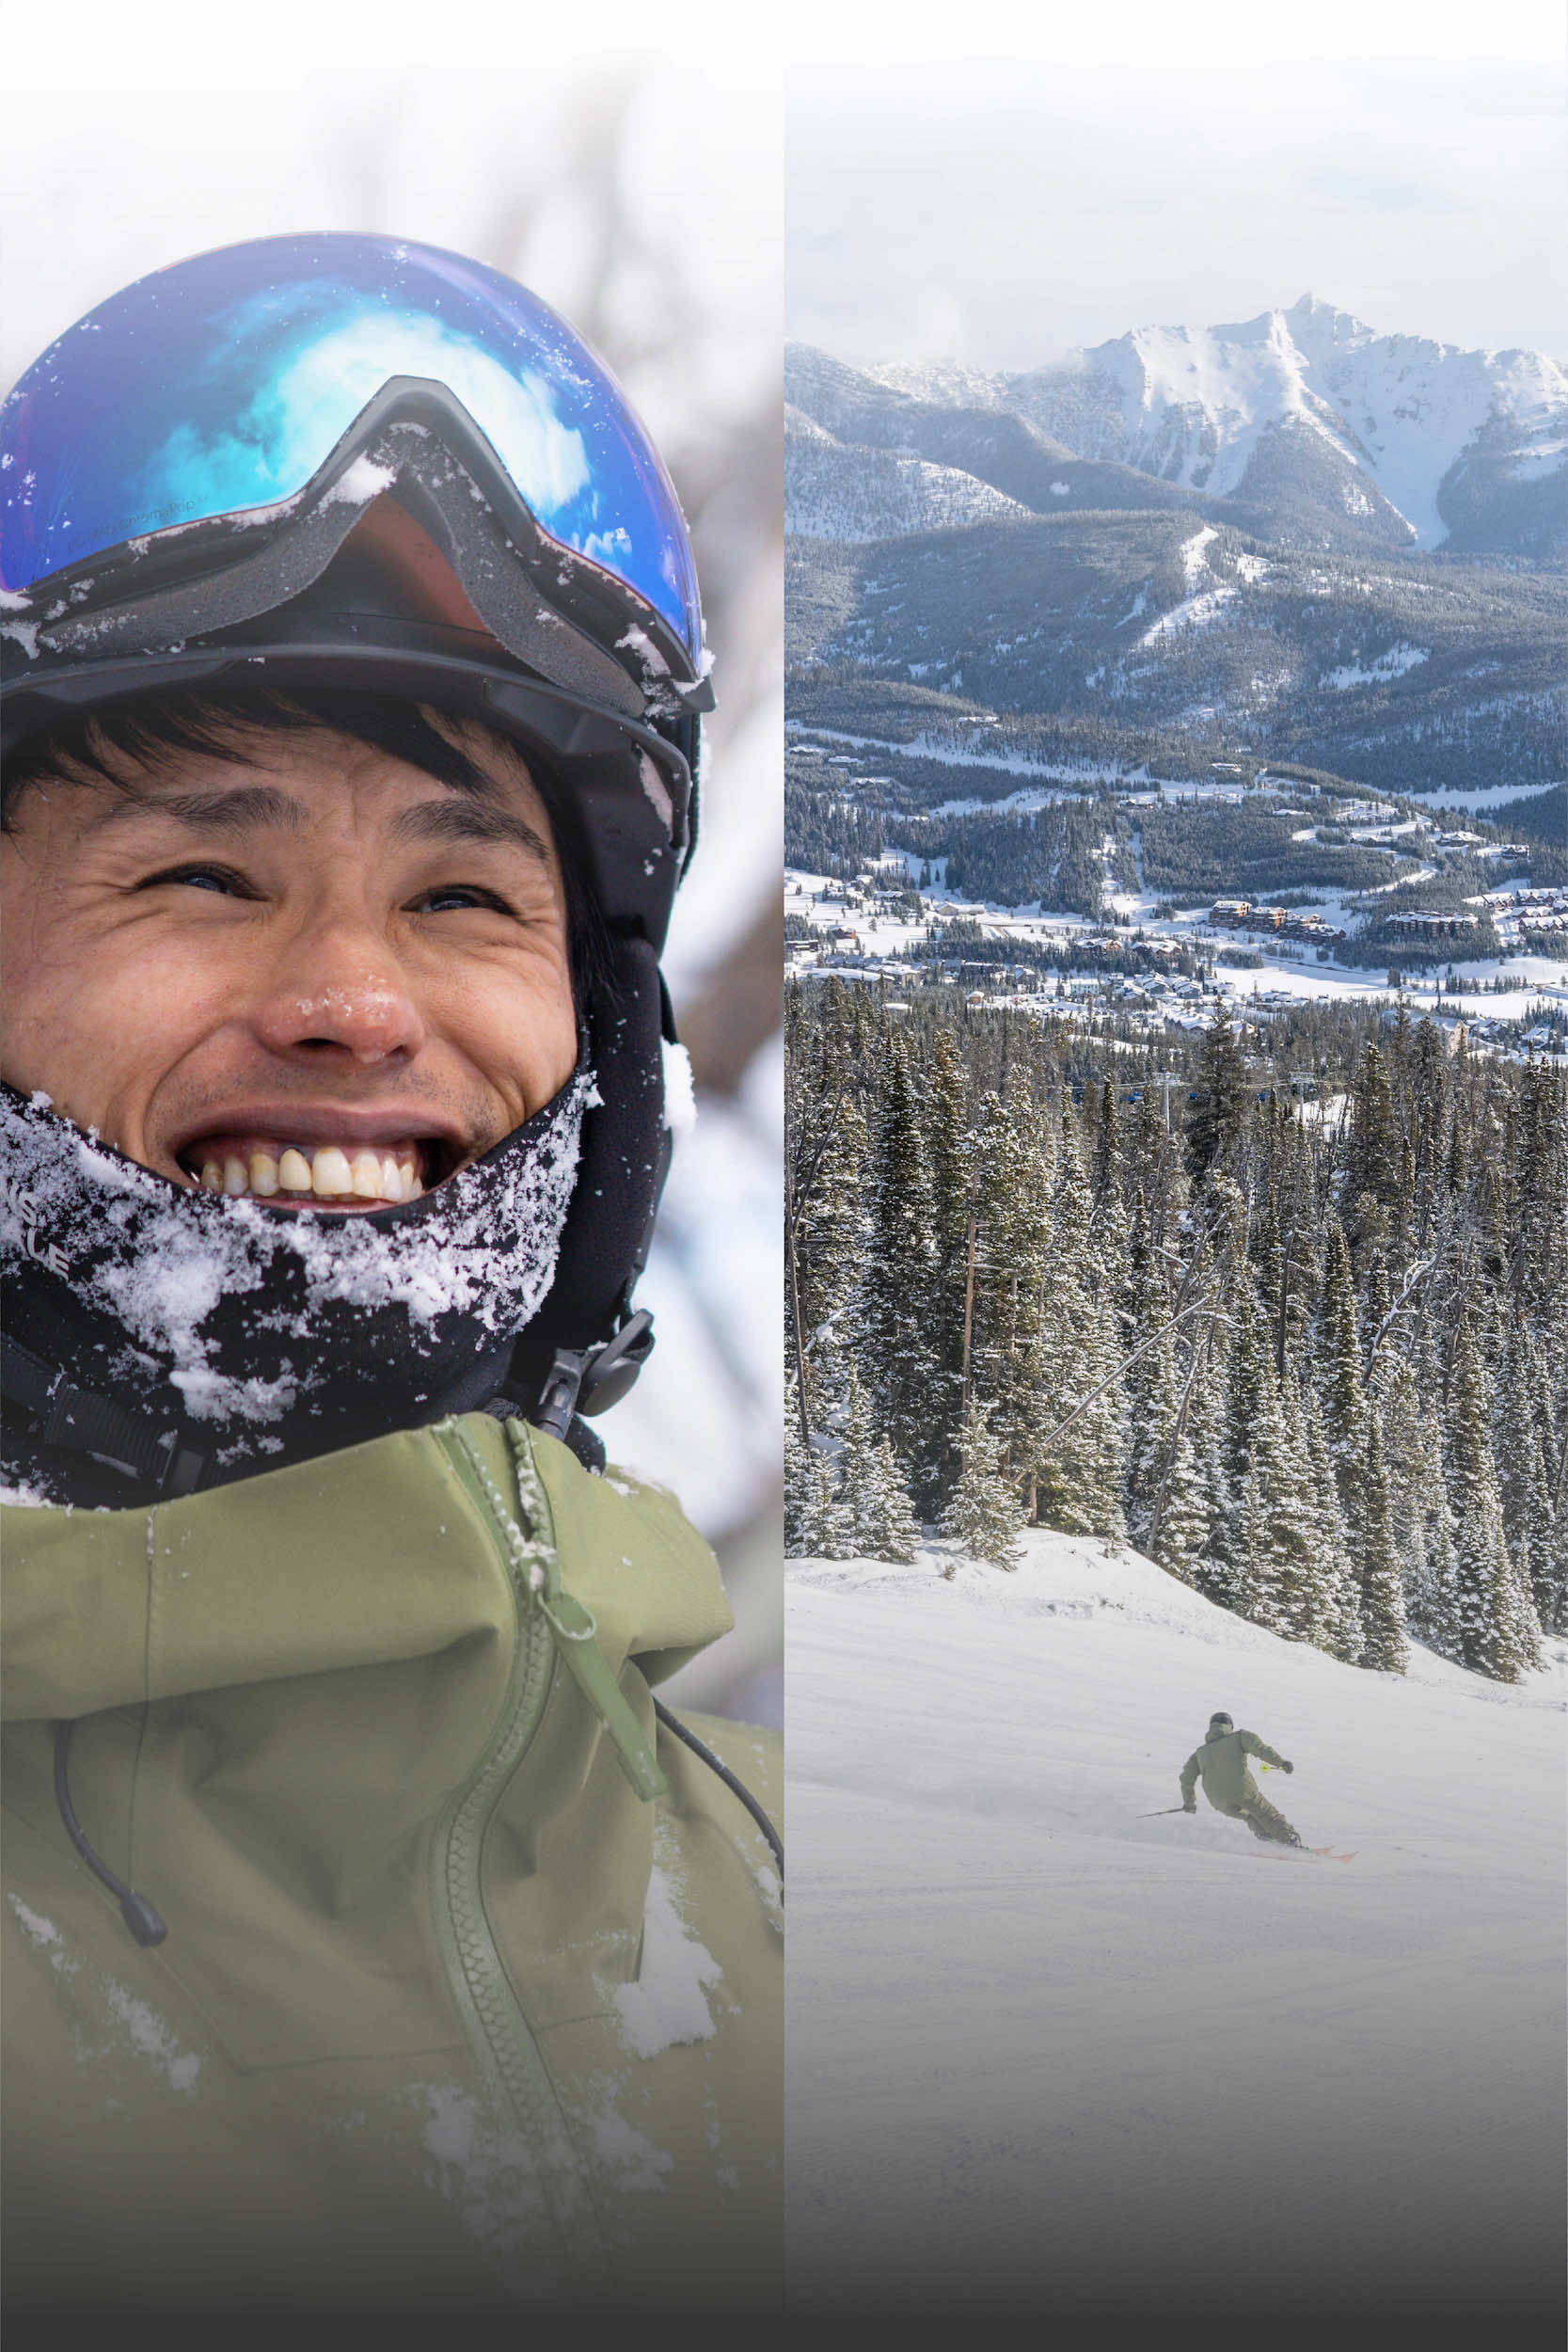 Side-by-side images of a man smiling in ski gear and the man skiing on a groomed ski run at Big Sky Resort